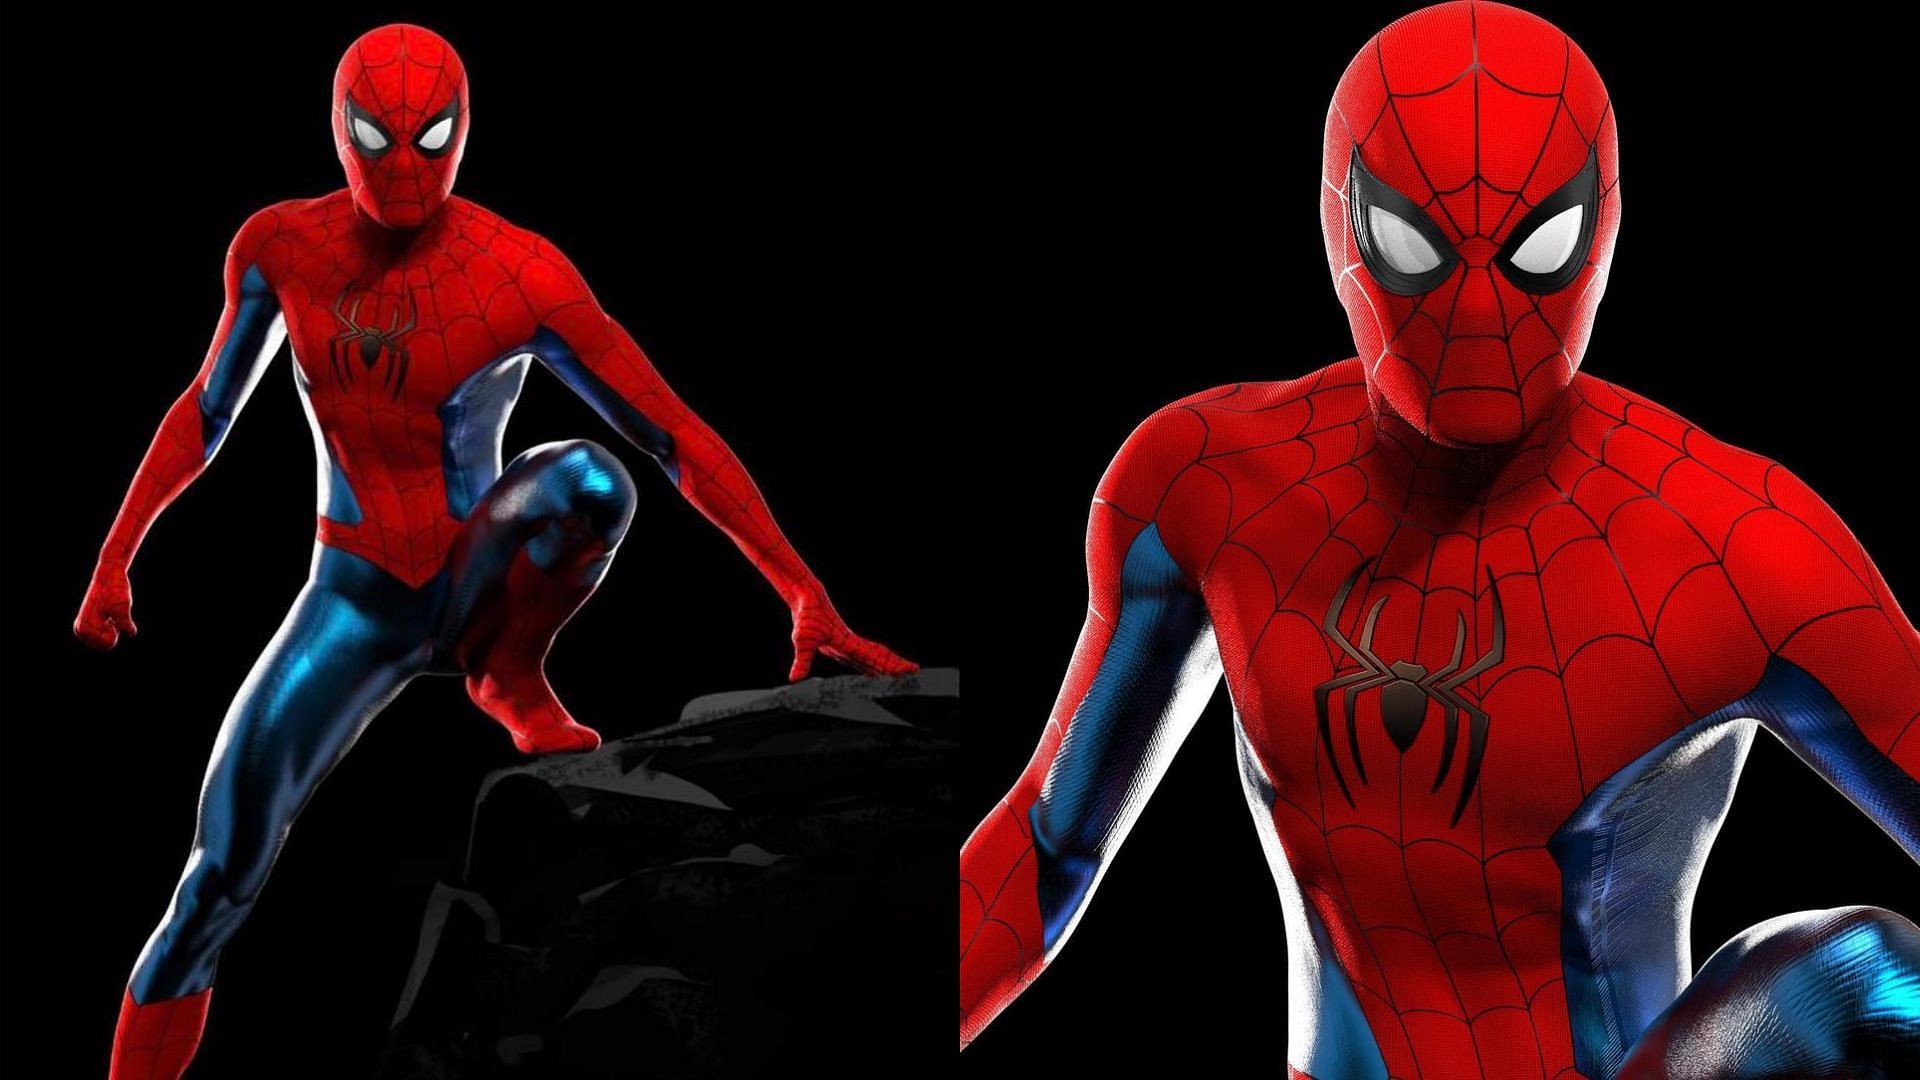 Tom Hollands Final Suit Revealed In Spider Man No Way Home Concept Art